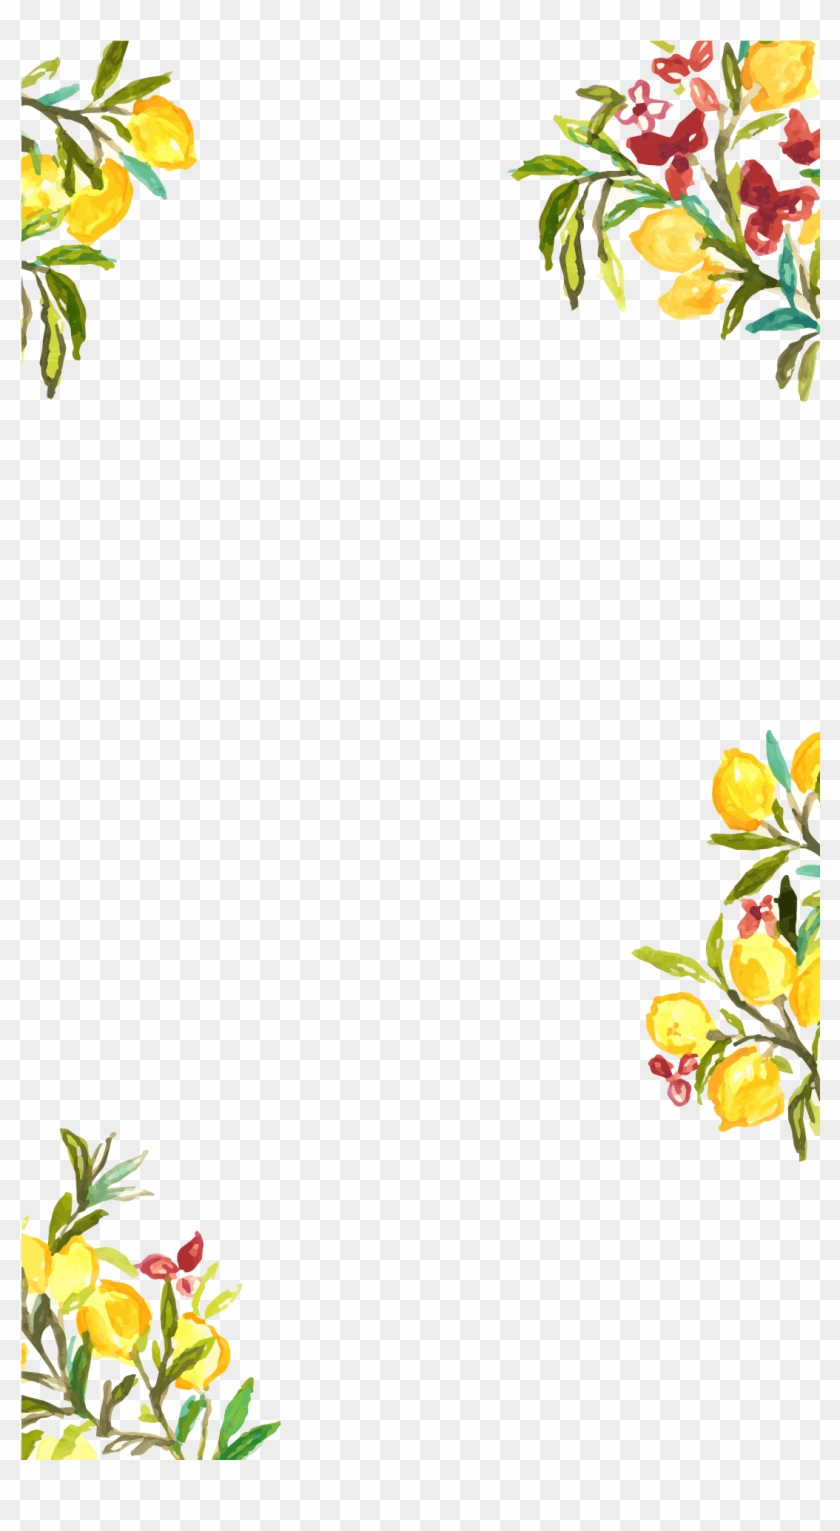 Wedding Snapchat Filters Weddingwire Clipart